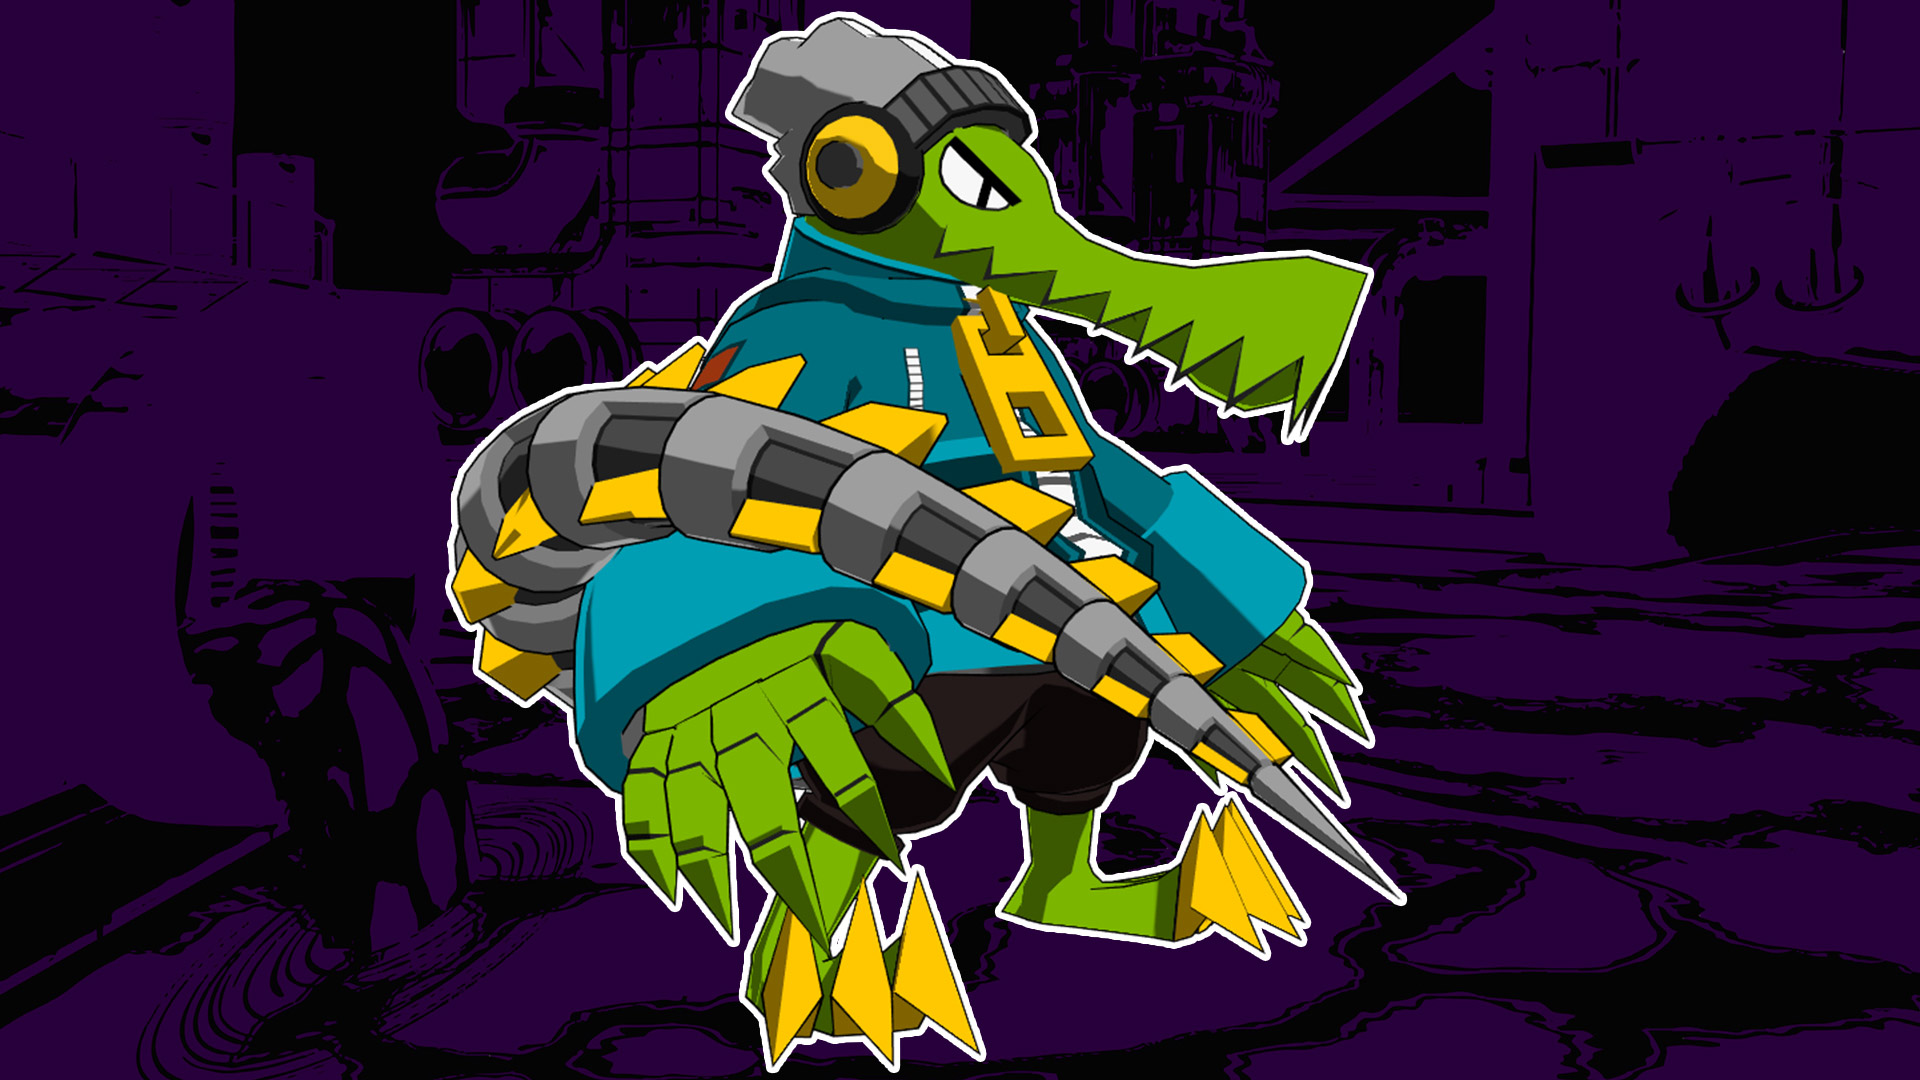 lethal league blaze switch release date